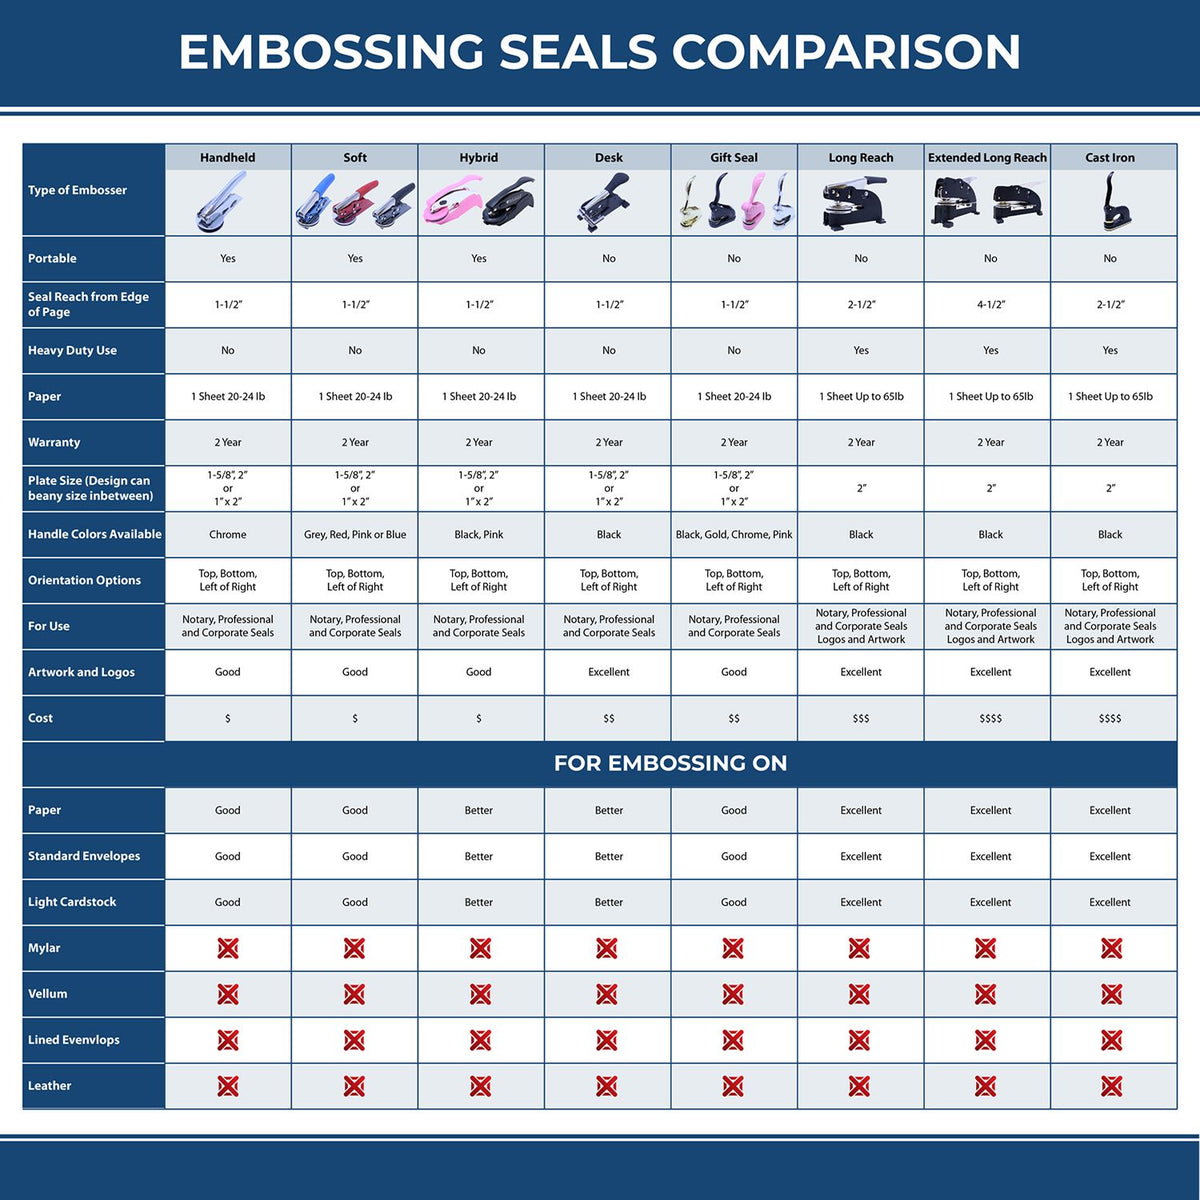 A comparison chart for the different types of mount models available for the State of Kansas Long Reach Architectural Embossing Seal.